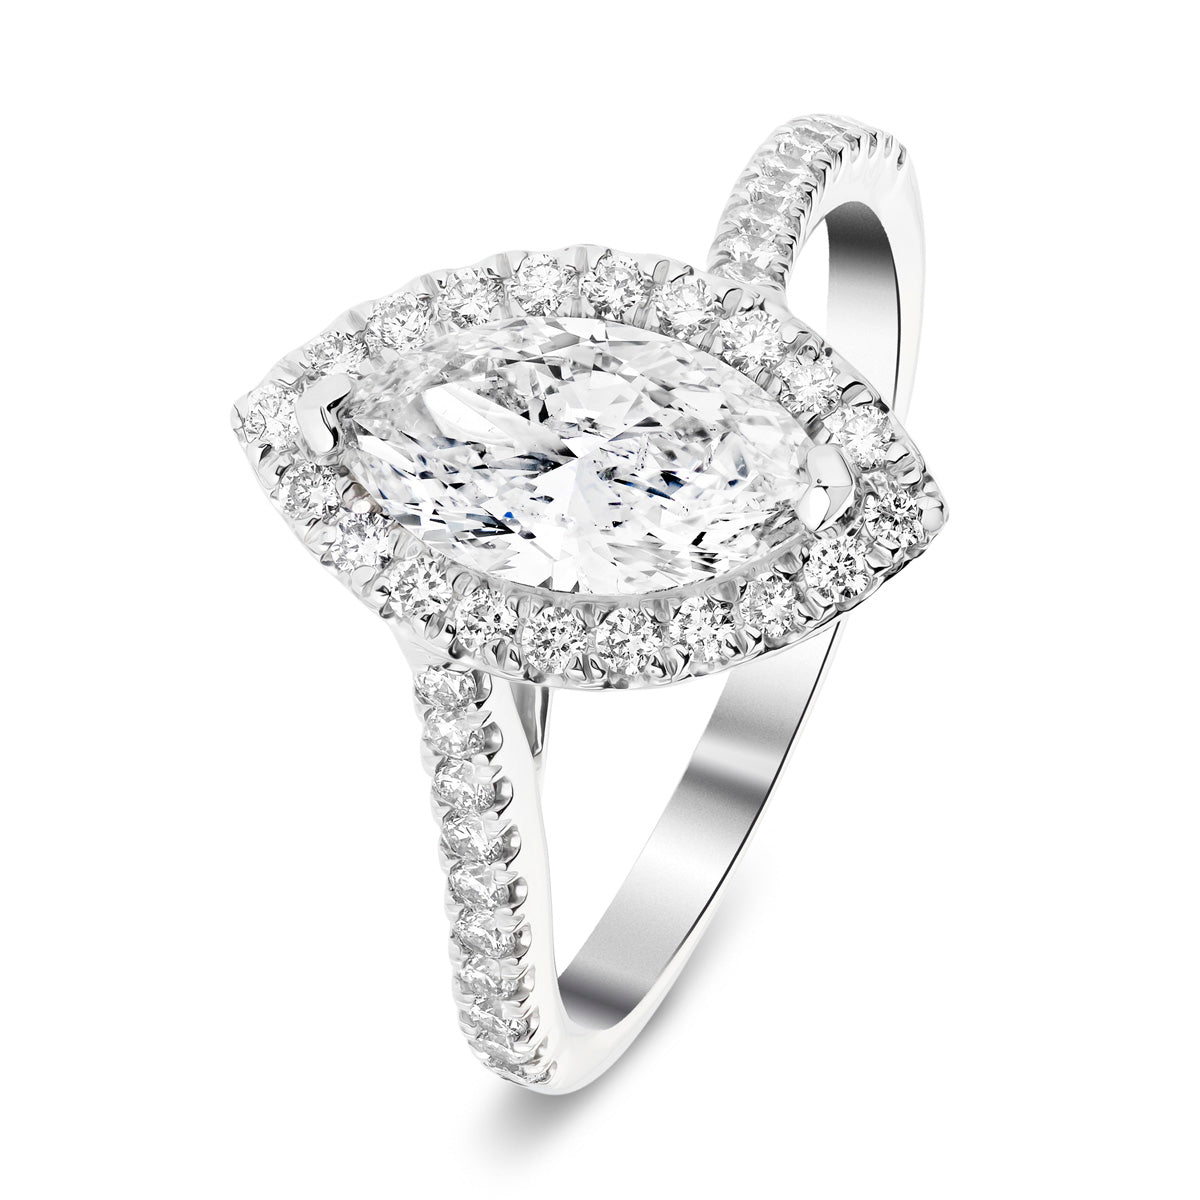 Certified Twist Marquise Diamond Halo Engagement Ring 1.10ct G/SI in 18k White Gold - All Diamond